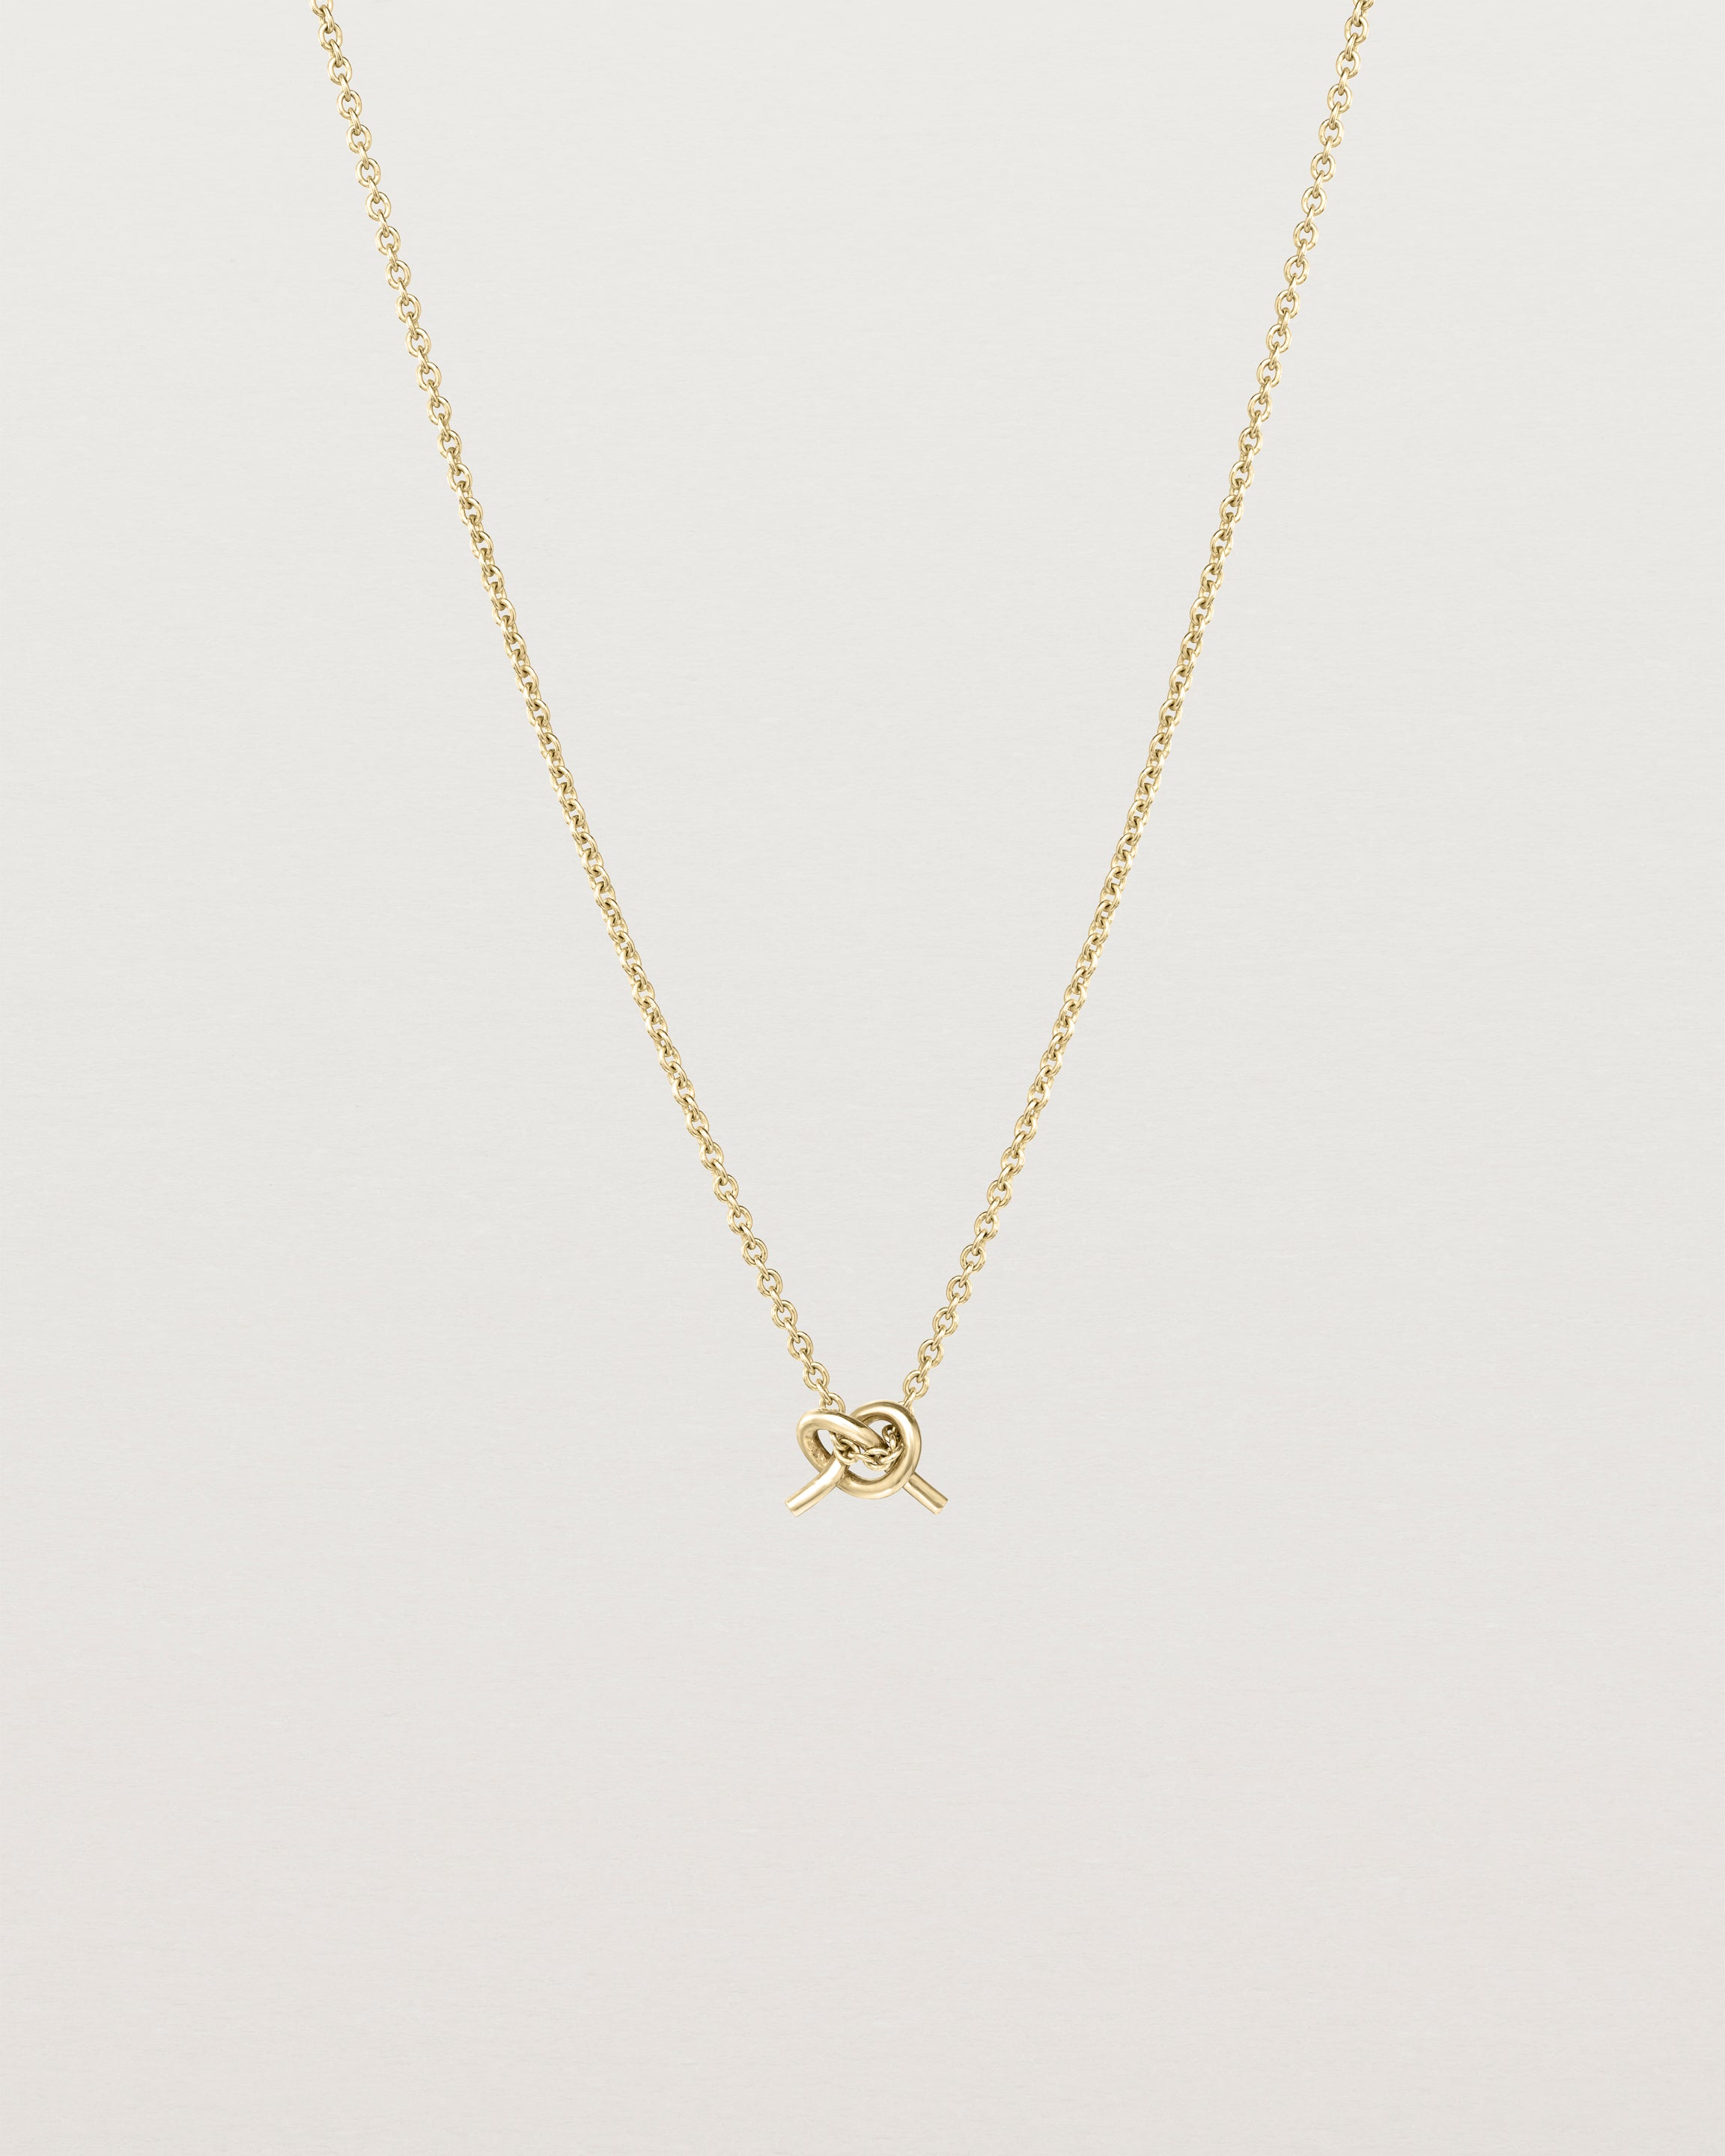 Front view of the Cara Necklace in yellow gold.